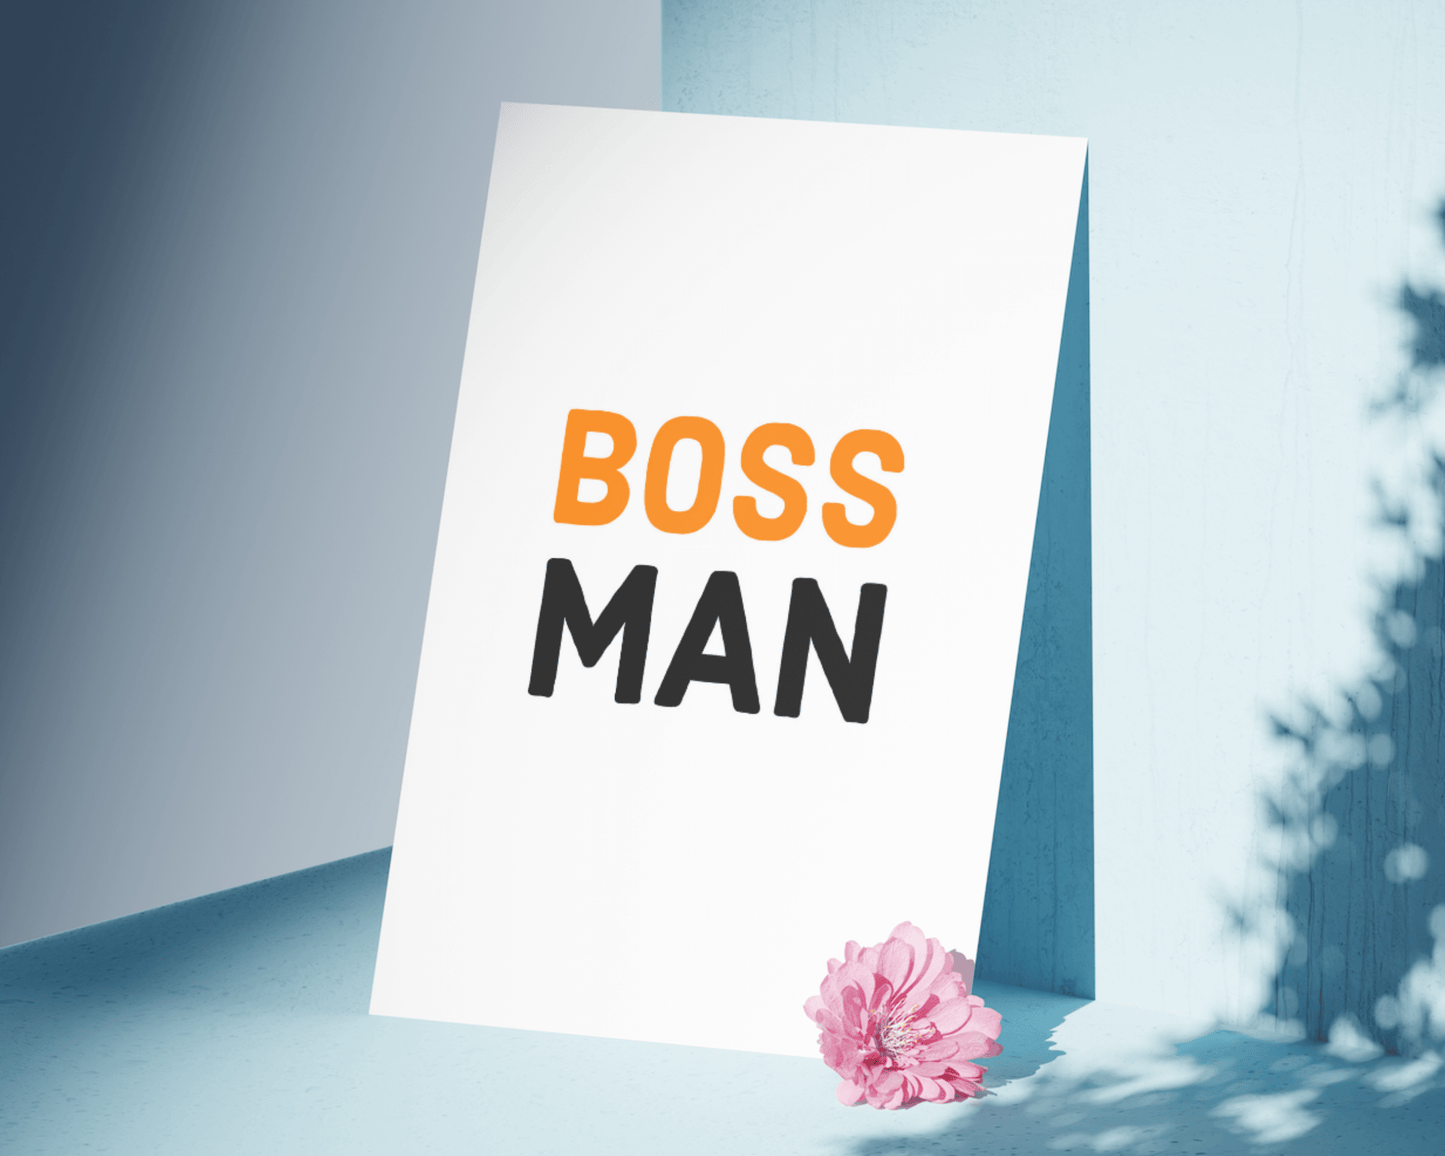 Boss Man Office Manager Leader Director Wall Print Prints Moments That Unite